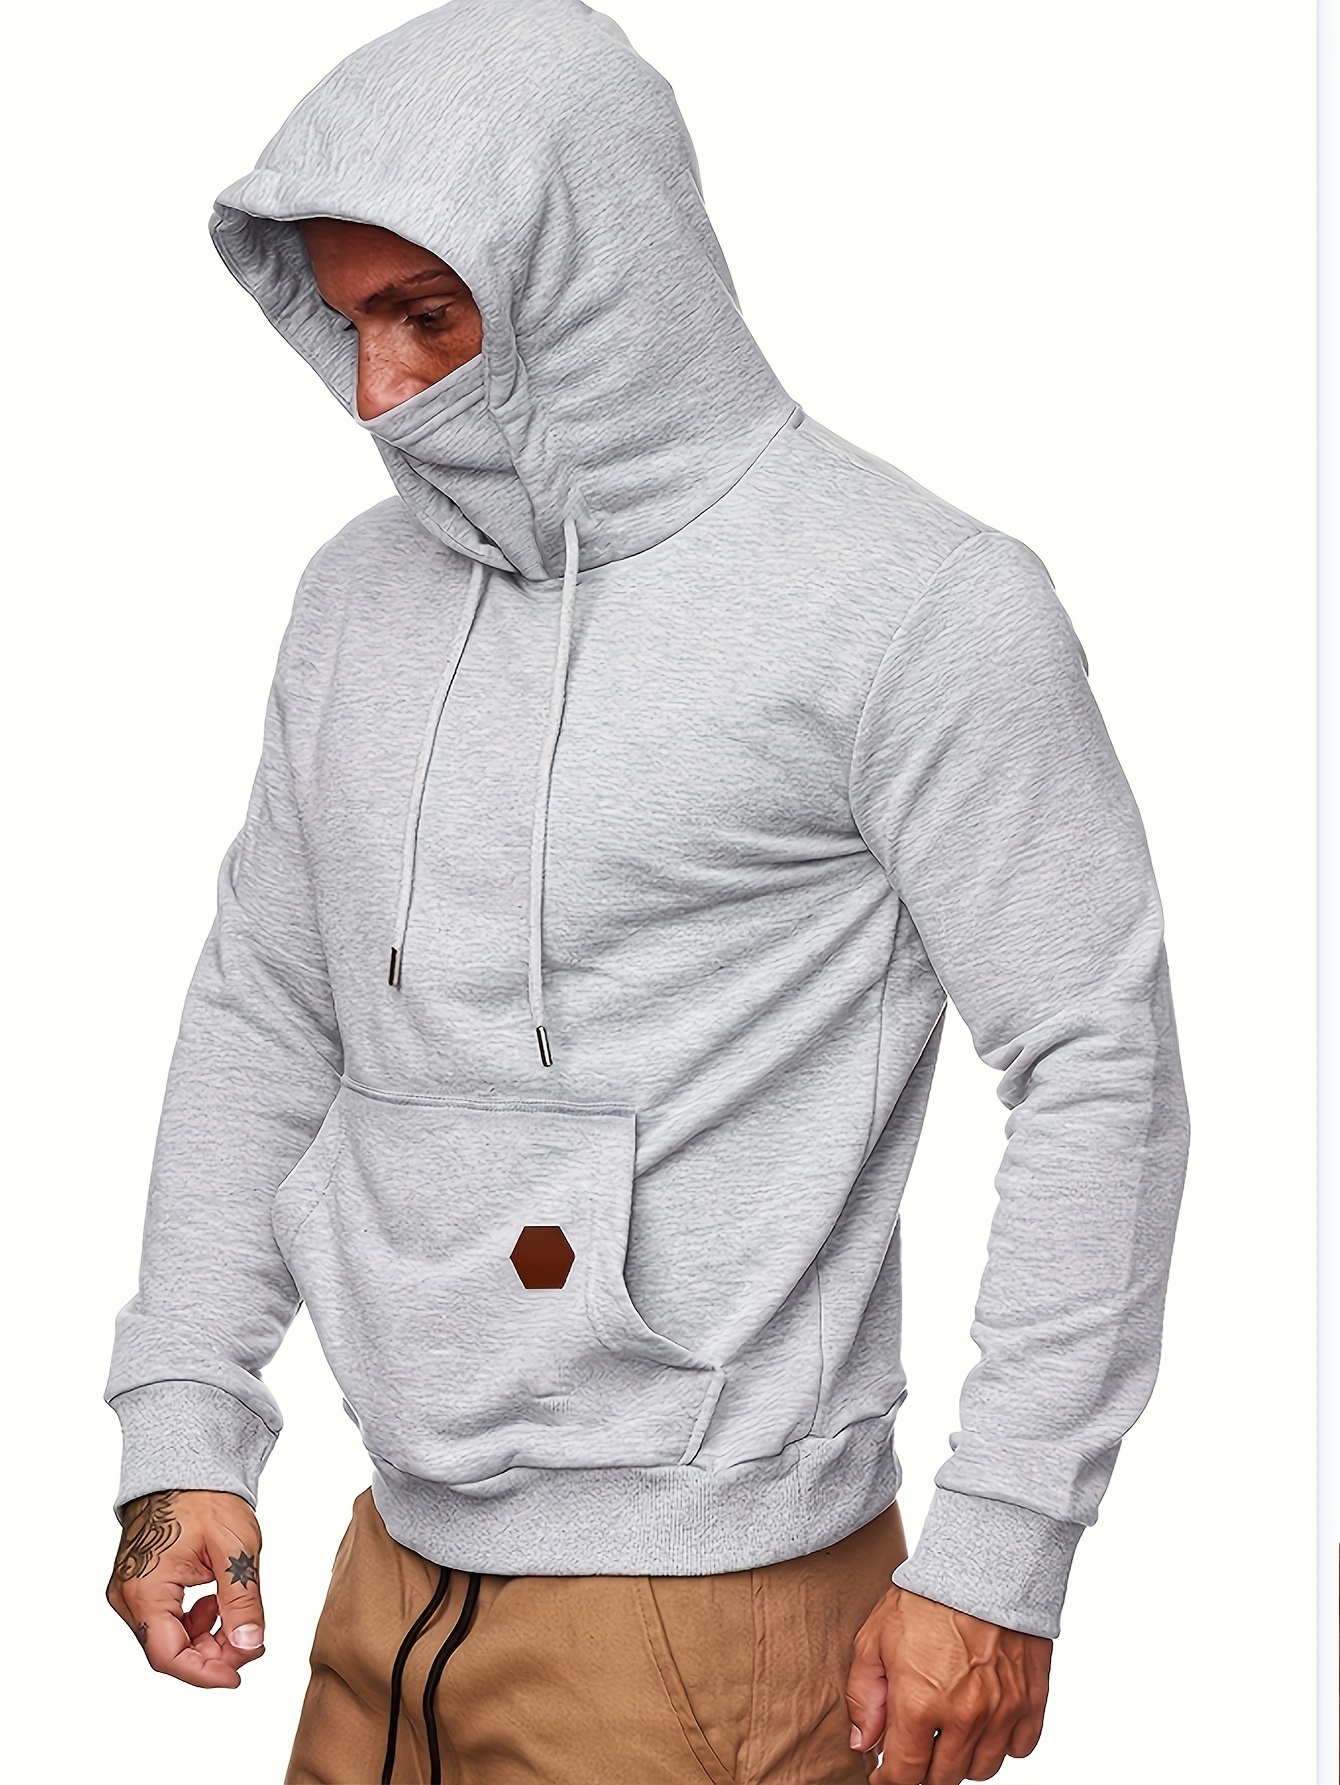 Face Cover Casual Men's Hoodie Drawstring Hooded Sweatshirt, White, M